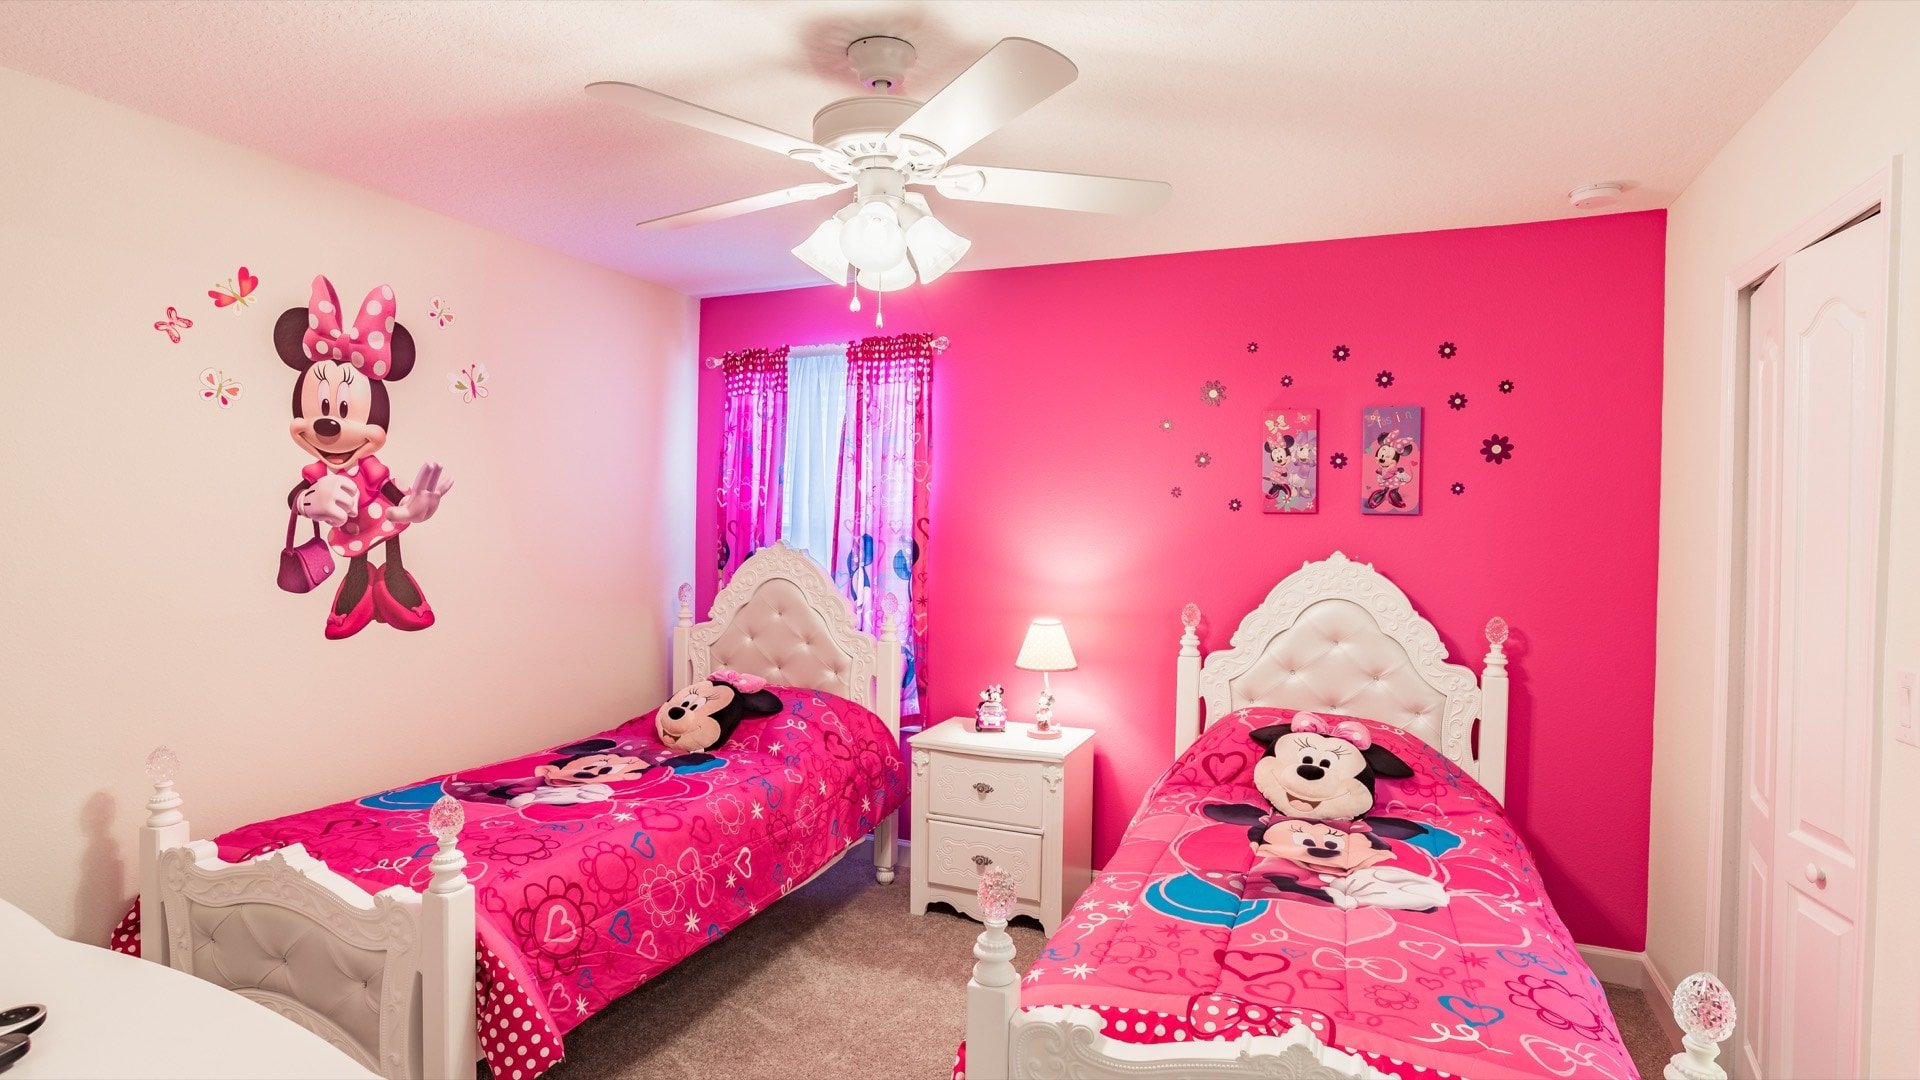 Two Twins Bedroom 3 Upstairs
Shared Bathroom-Shower
Minnie Theme
32